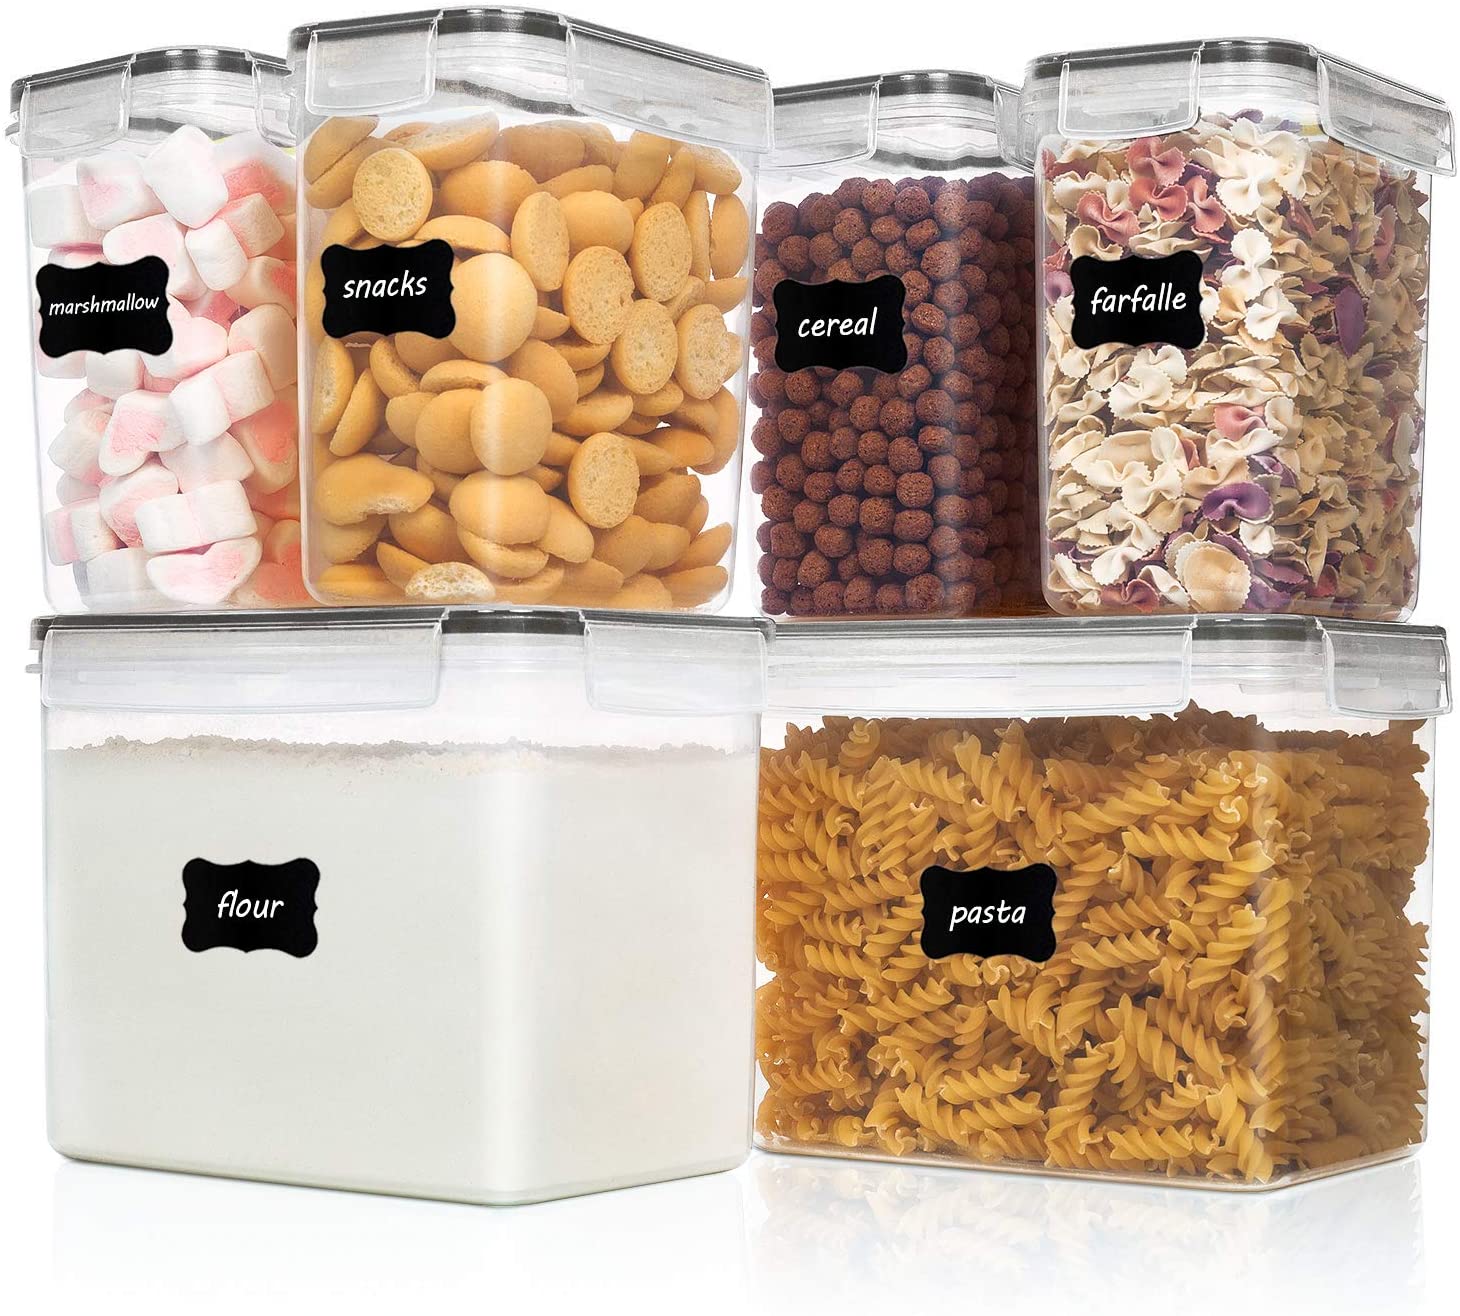  CosyStora Airtight Food Storage Containers Set 6 Pieces POP  Open Clear Plastic Canisters with lids,BPA Free, Kitchen Pantry  Organization and Storage Containers for Bakery Cookies Nuts Sugar Storage:  Home & Kitchen